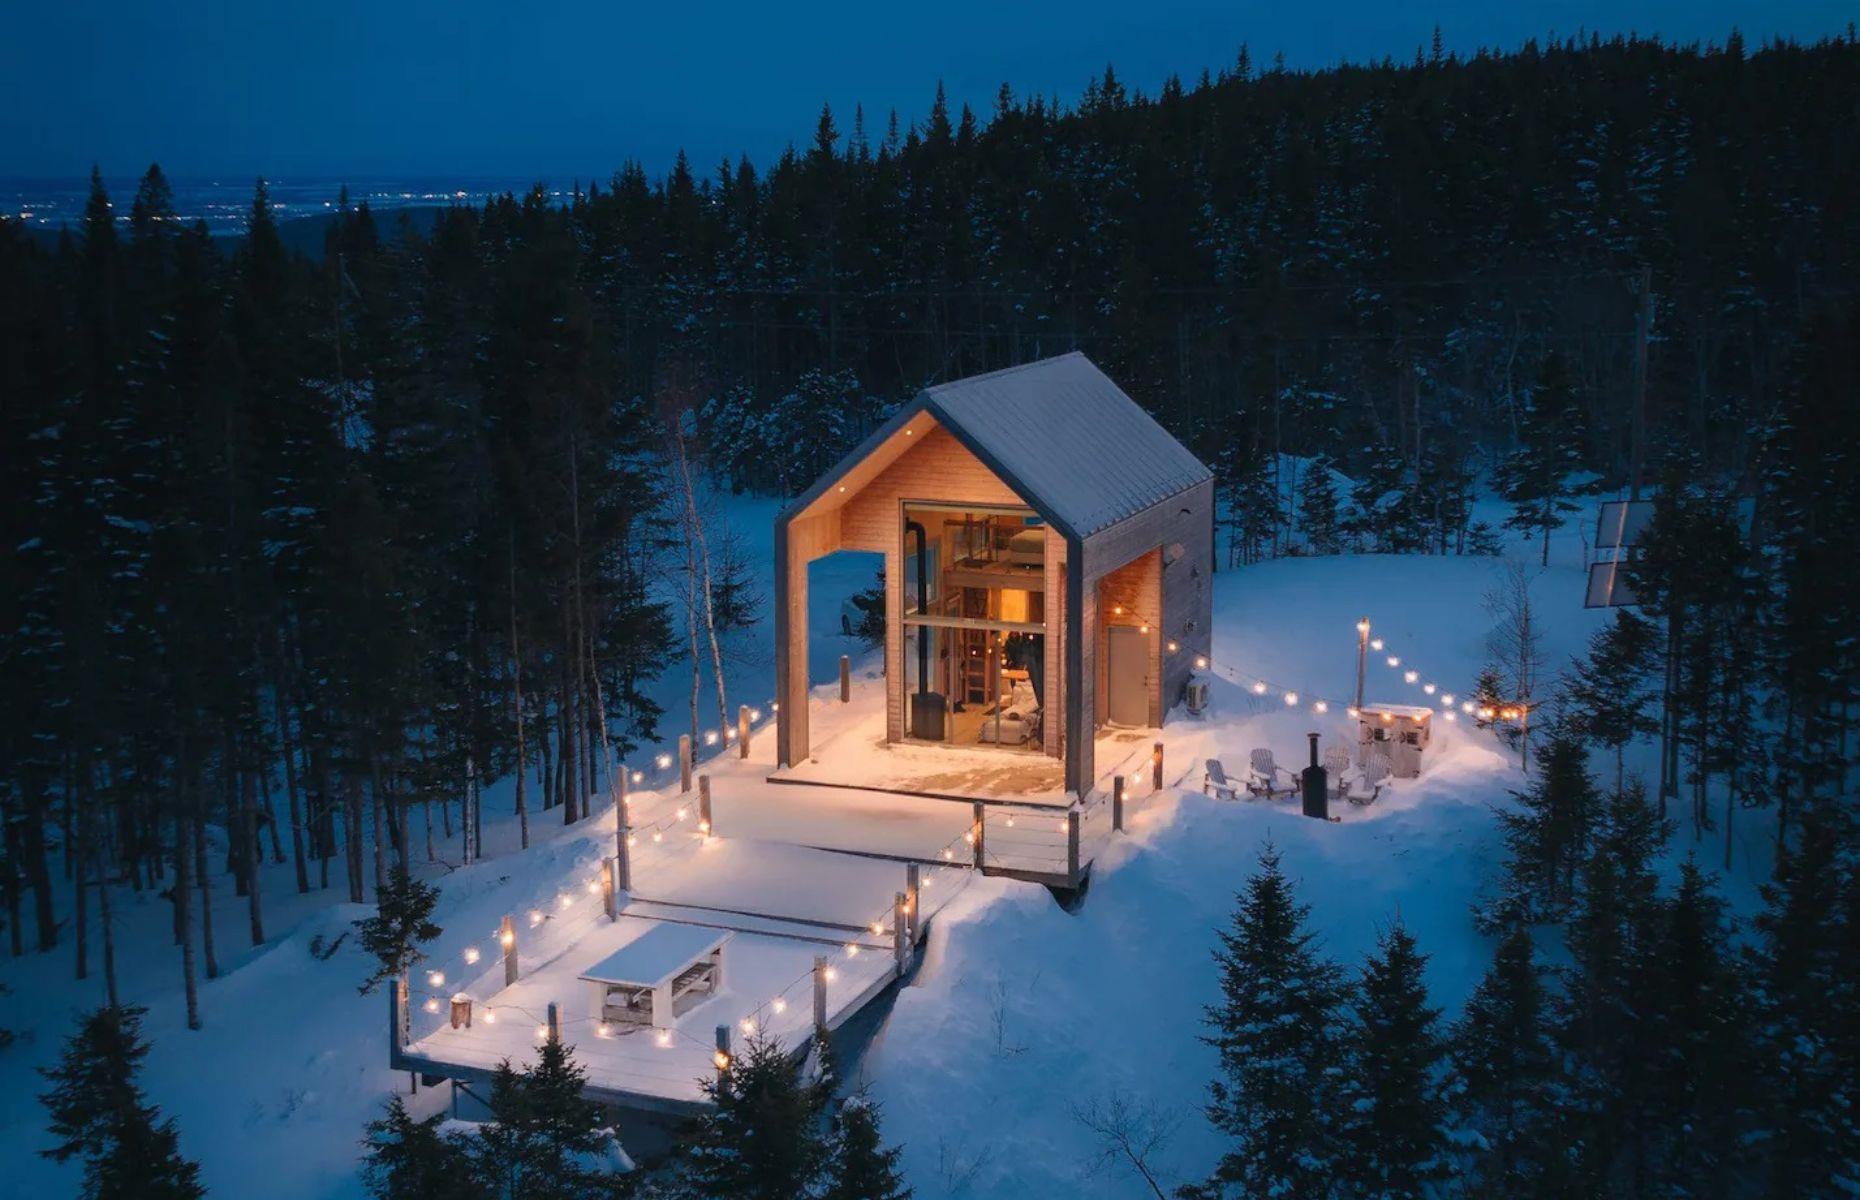 <p>Known as <a href="https://www.airbnb.ca/rooms/27050494?">Le Lagöm</a>, a Swedish word meaning "just the right amount," this envy-inducing retreat can be found on a stunning elevated plot overlooking the mountains of Lac-Beauport and the Saint Laurent River. Secluded among towering trees, the timber tiny home has been described as an ecologic chalet and runs entirely off solar power, making it as sustainable as it is attractive.</p>